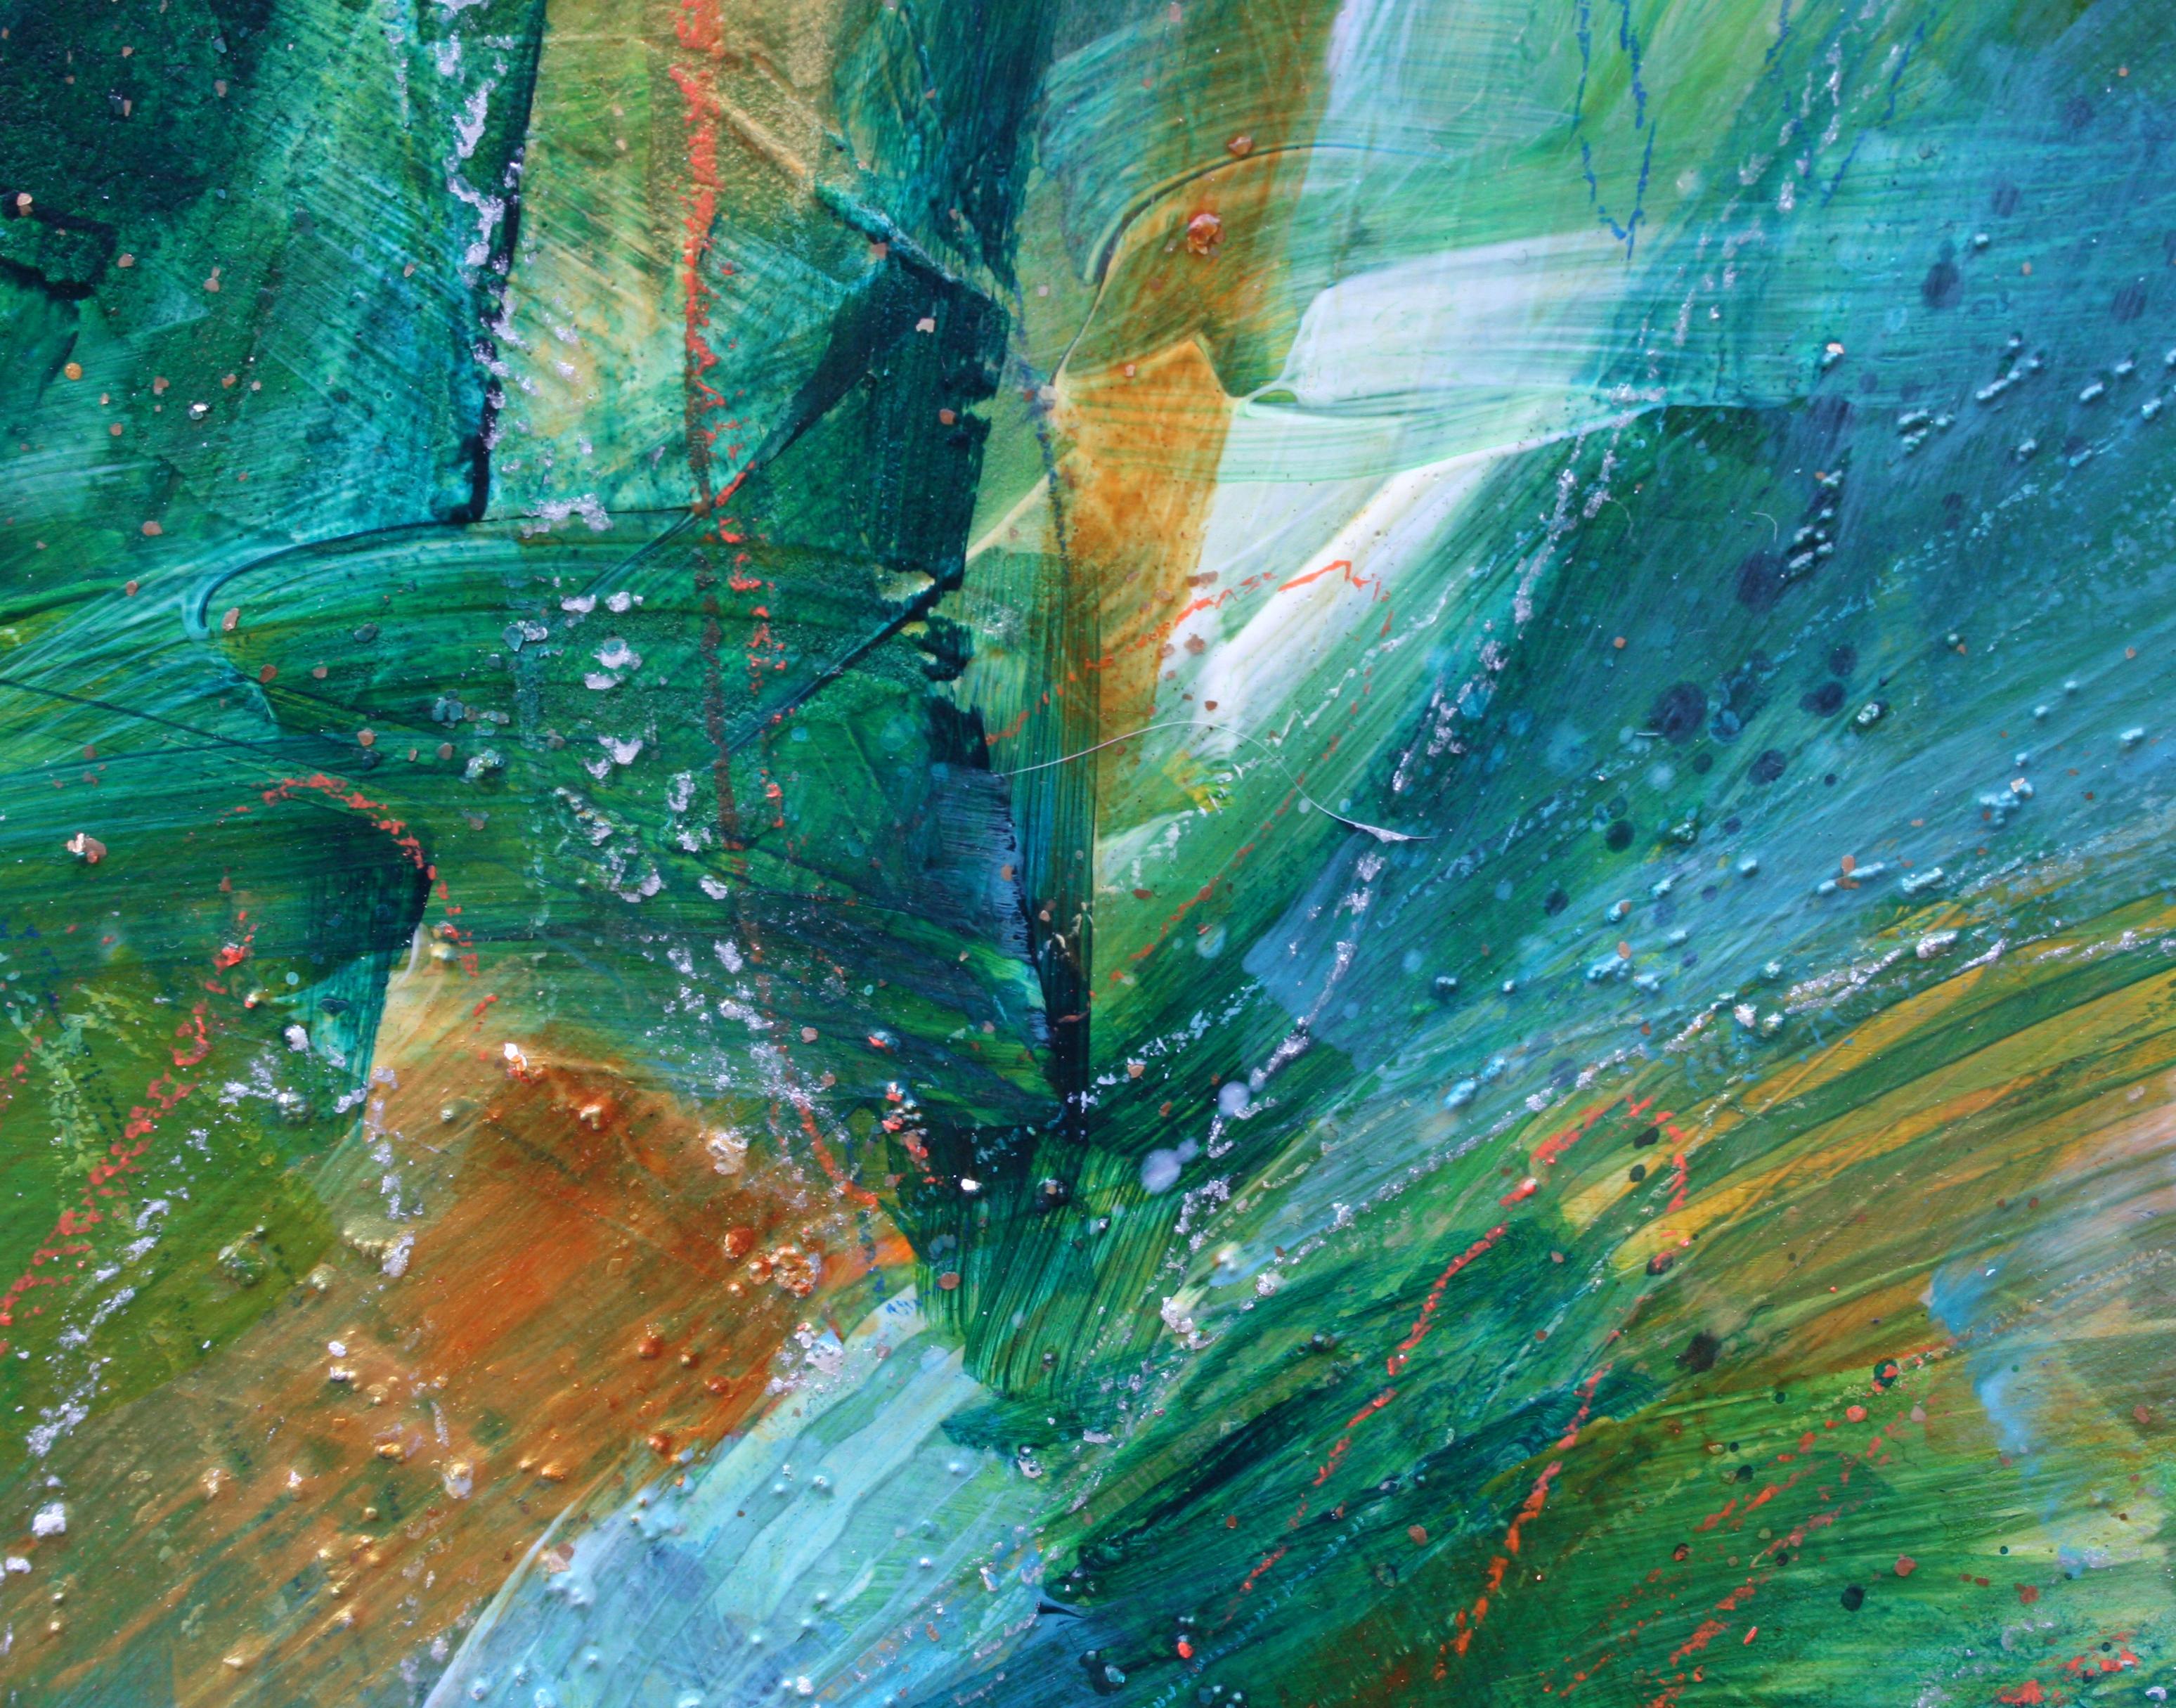 <p>Artist Comments<br />An expressive abstract in rich jewel tones of blue and green, with yellow and orange highlights. Paint flows outward in bursts, evoking joyful energy and tropical waters. For Courtney Jacobs, painting is an intuitive process